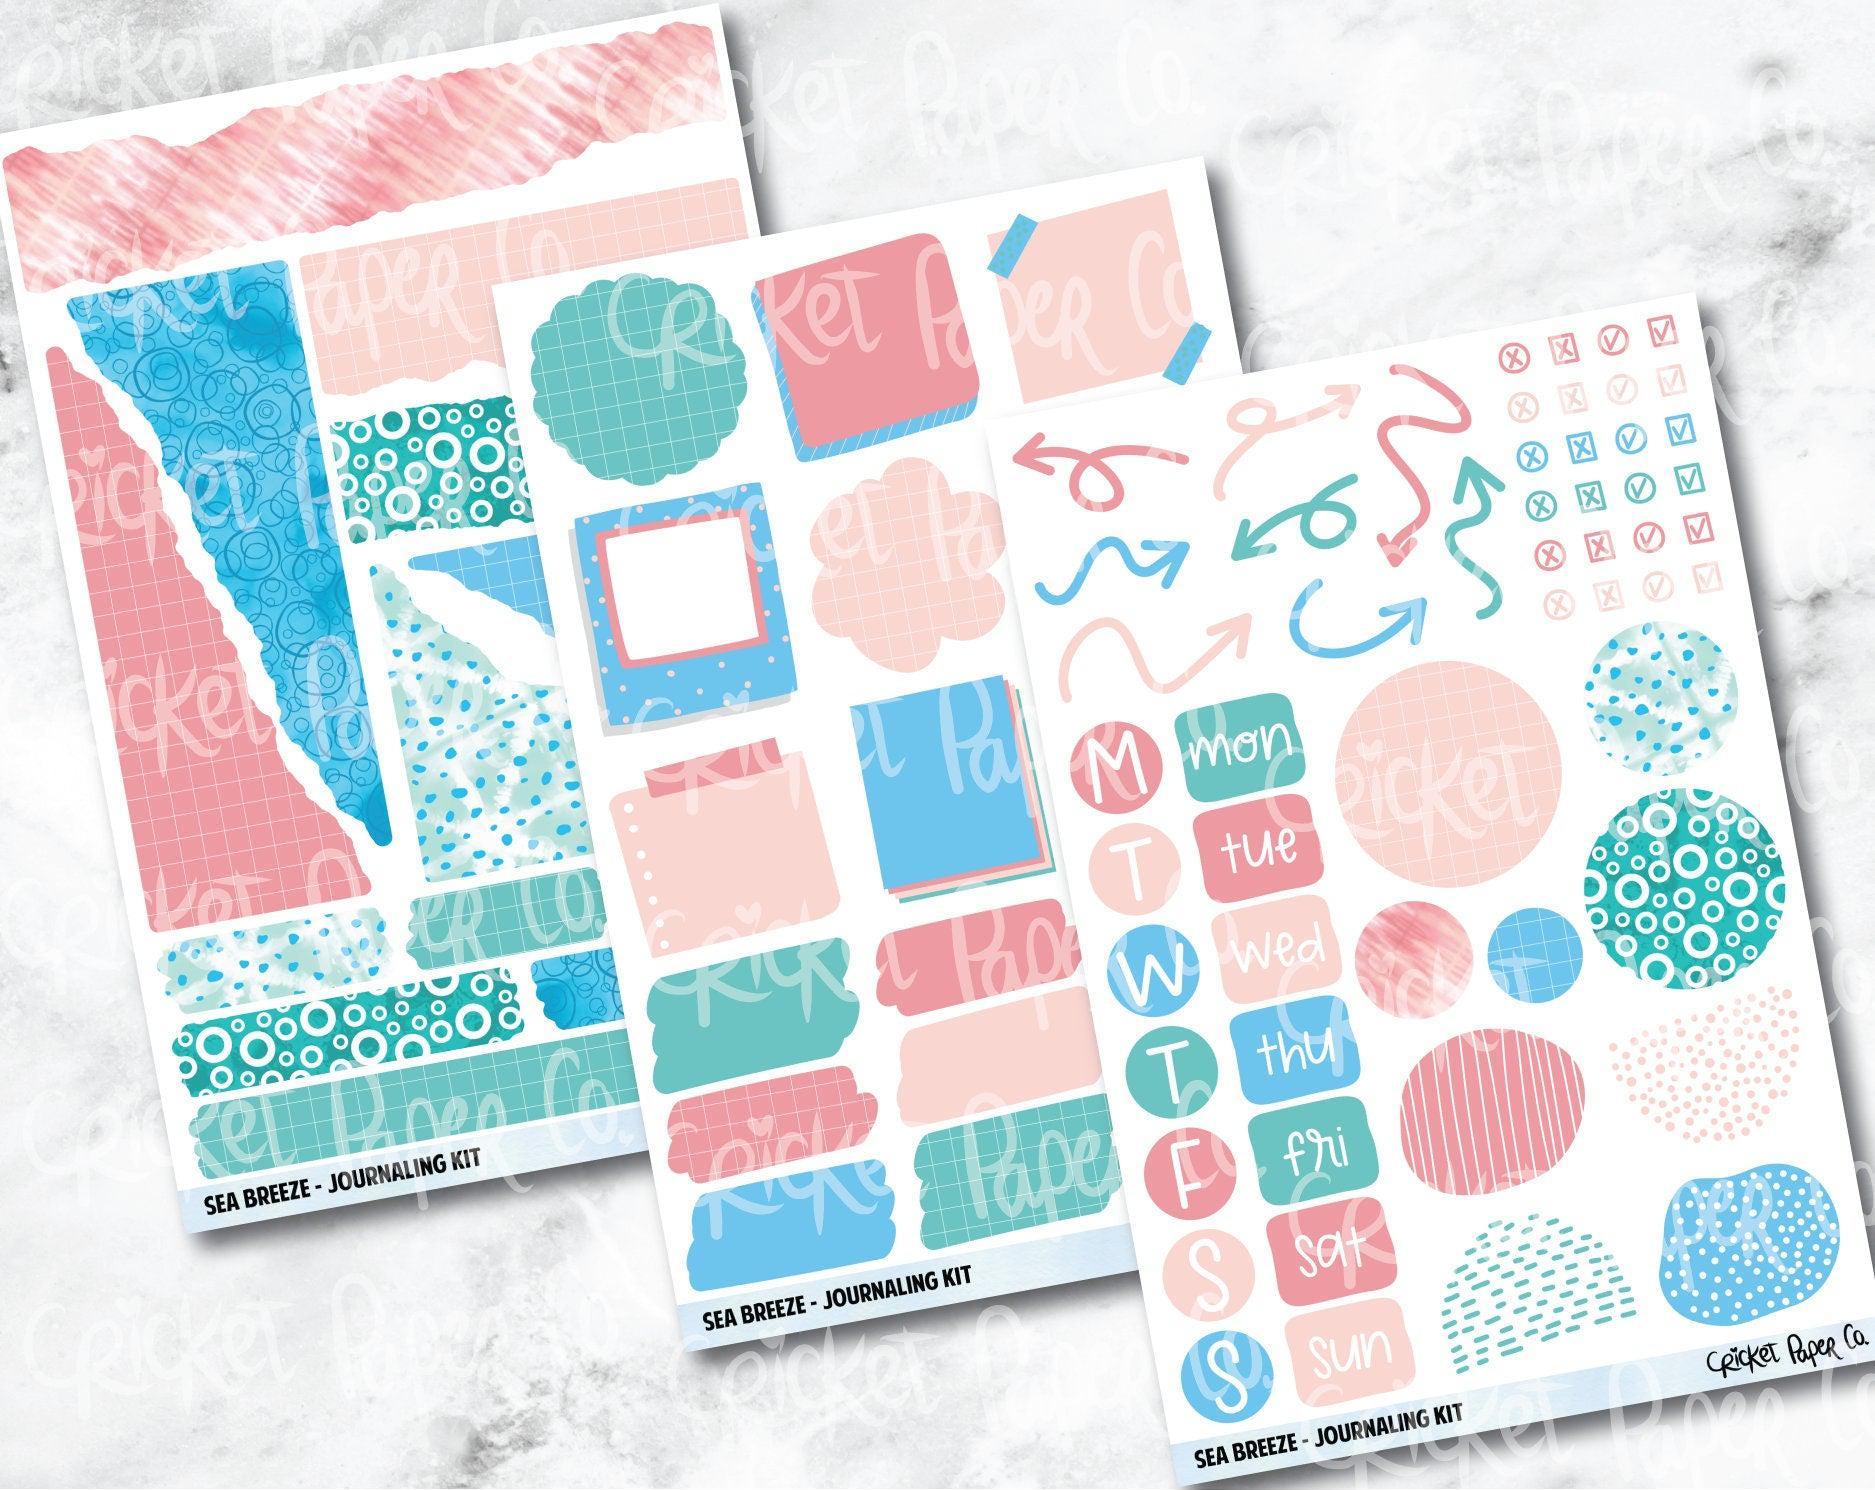 JOURNALING KIT Stickers for Planners, Journals and Notebooks - Sea Breeze-Cricket Paper Co.